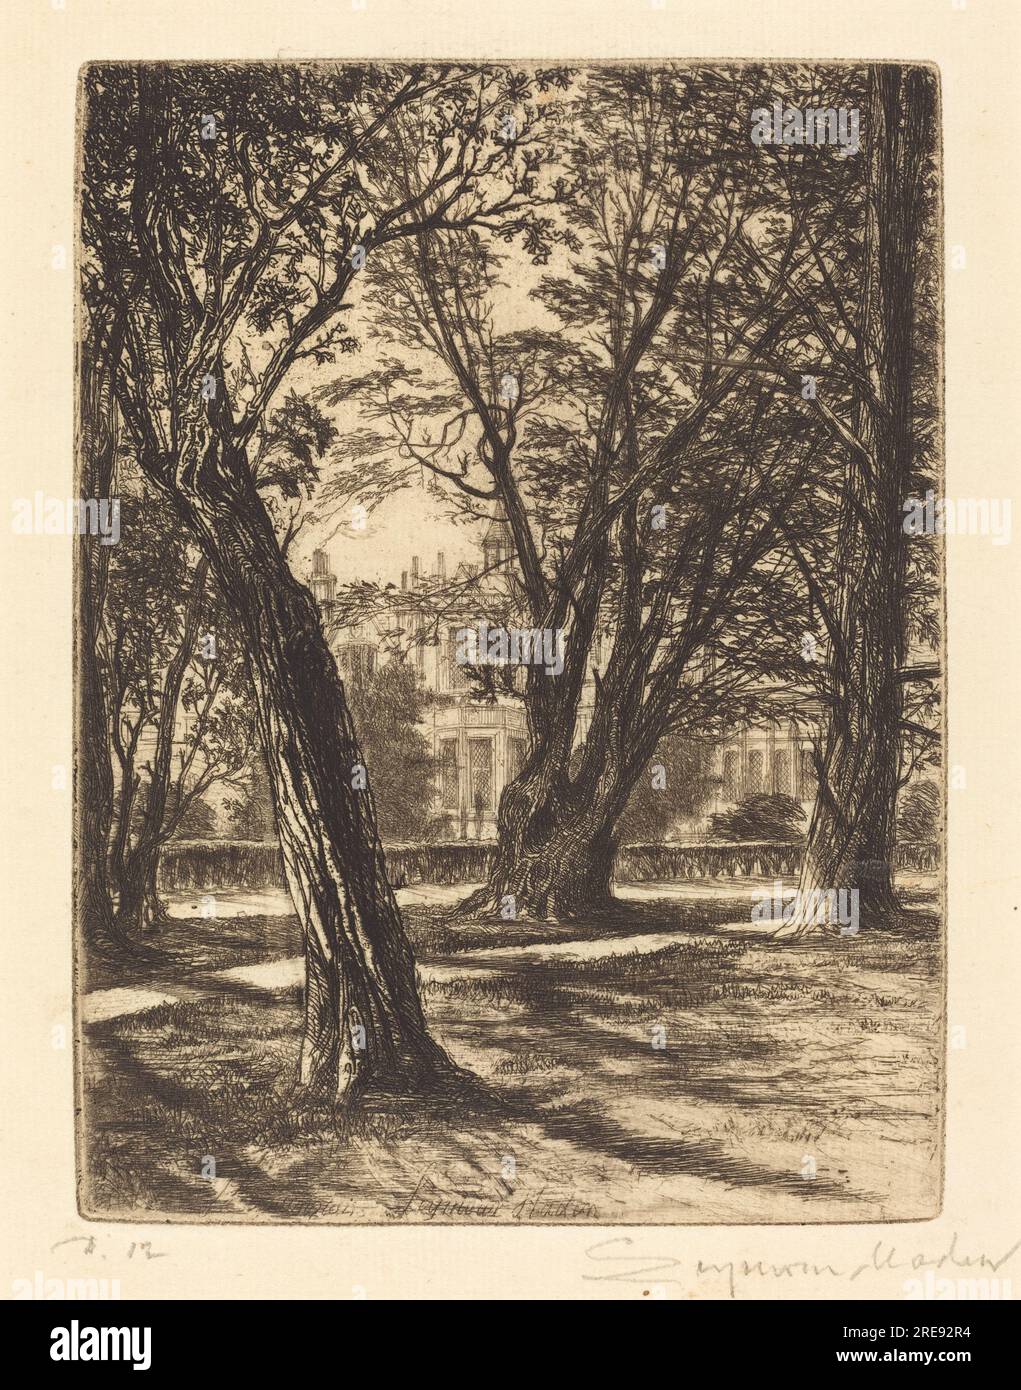 "Francis Seymour Haden, Kensington Gardens (The Small Plate), 1859, etching with drypoint, Gift of the Estate of John Ellerton Lodge, 1964.18.9" Foto Stock